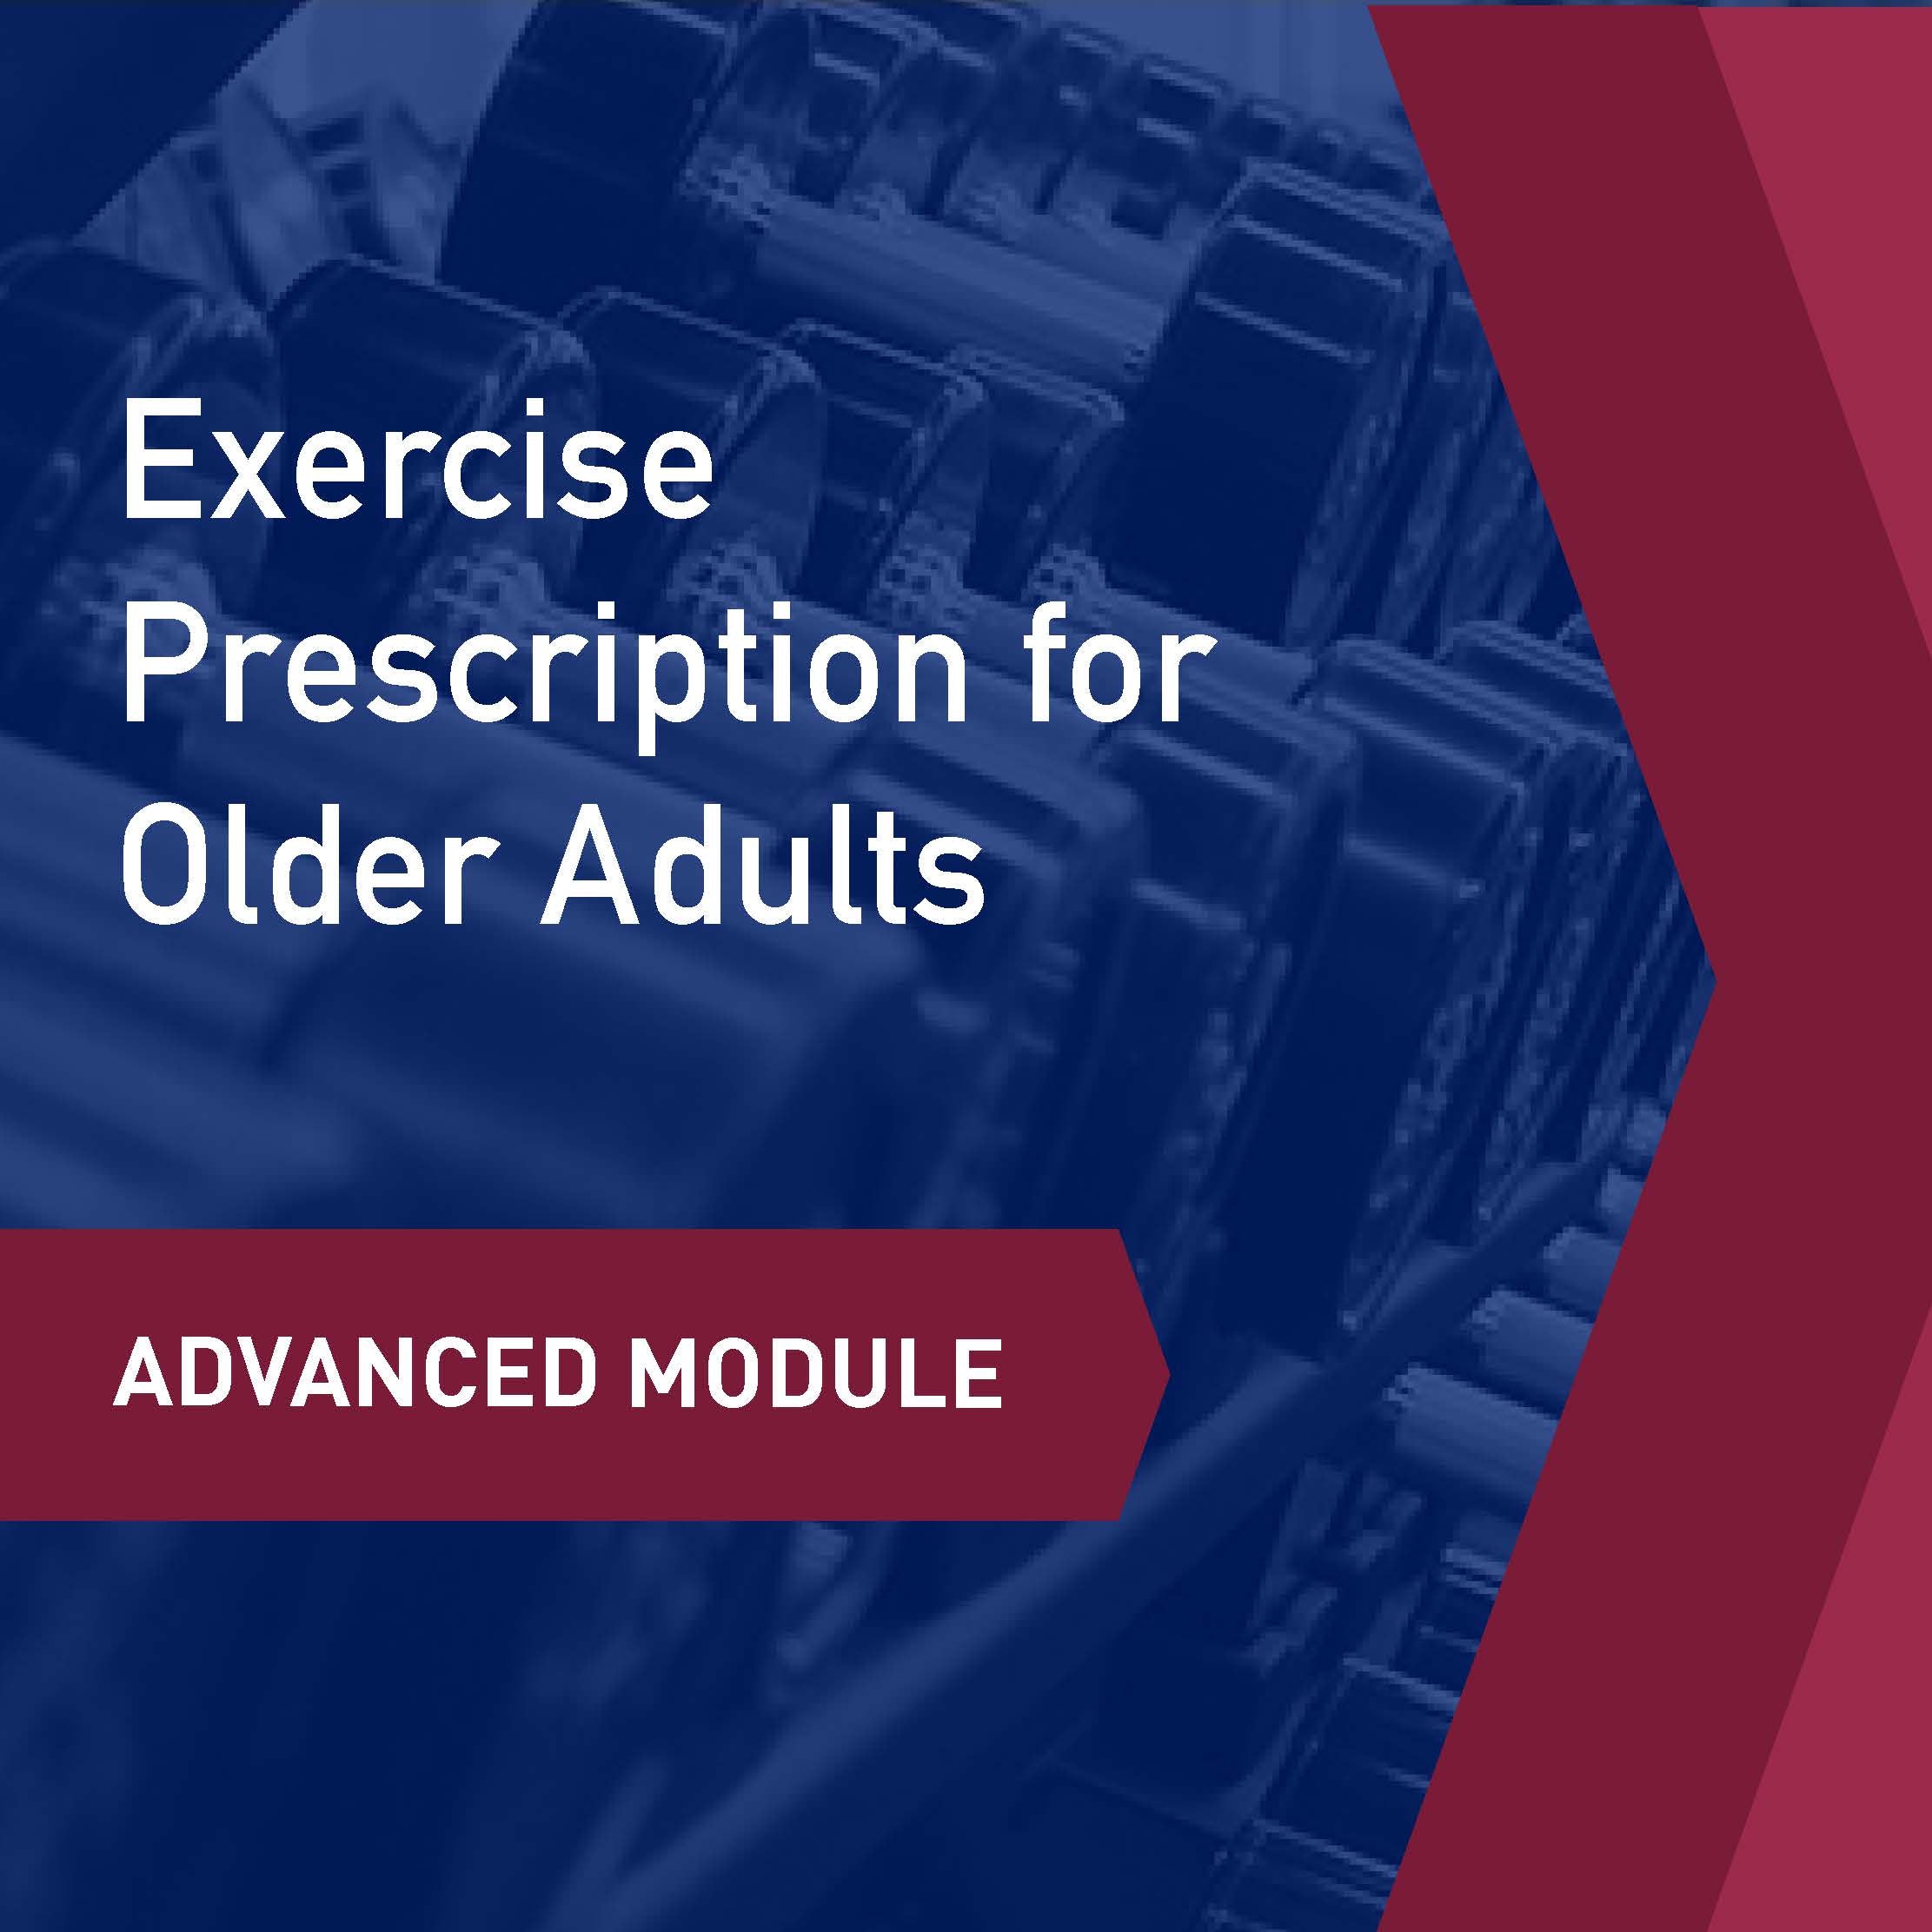 Advanced Learning Module: Exercise Prescription for Older Adults